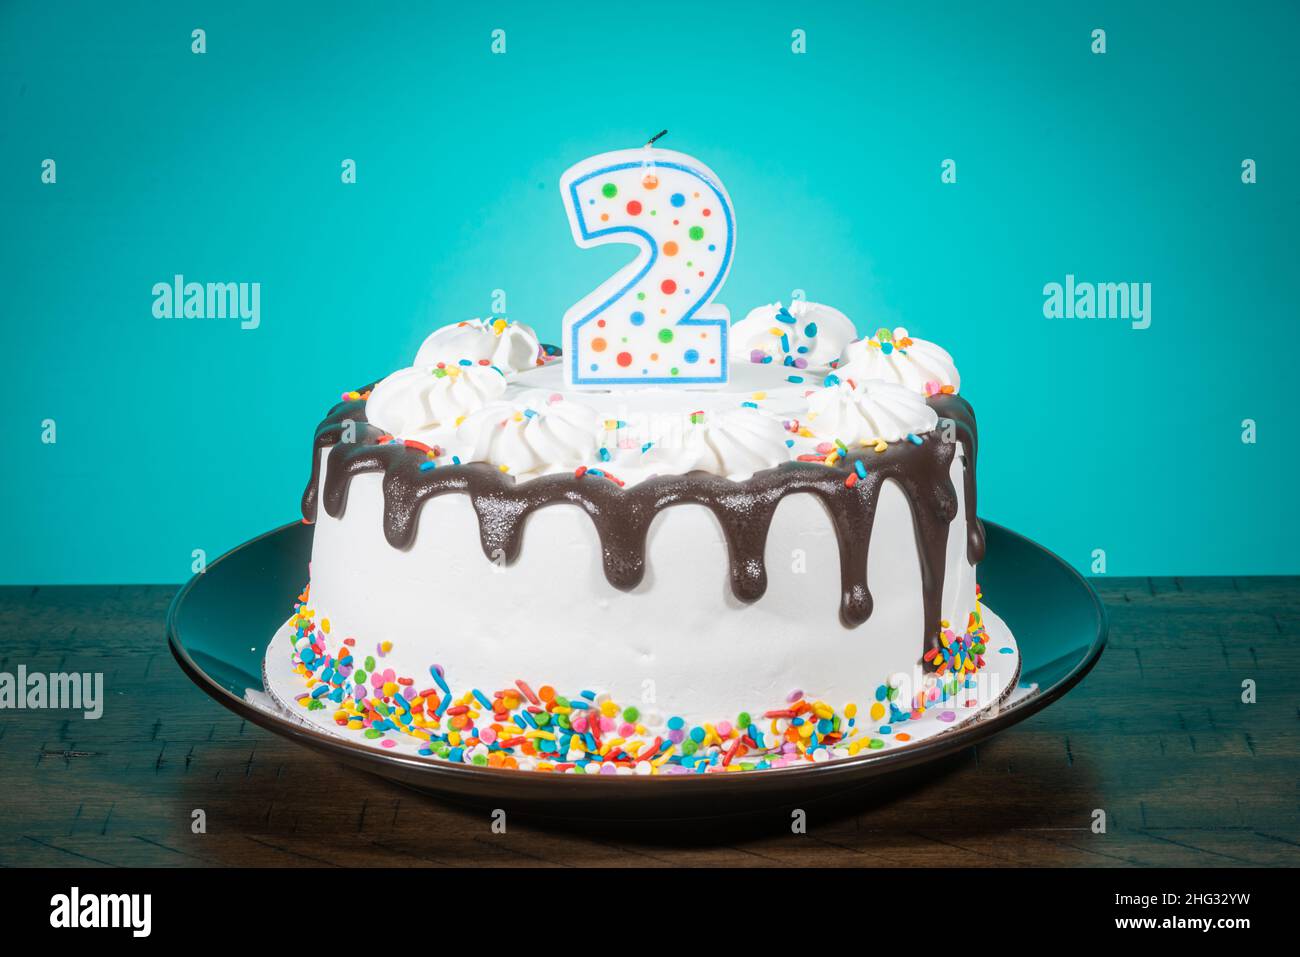 A birthday cake bears a candle in the shape of the number 2. Stock Photo